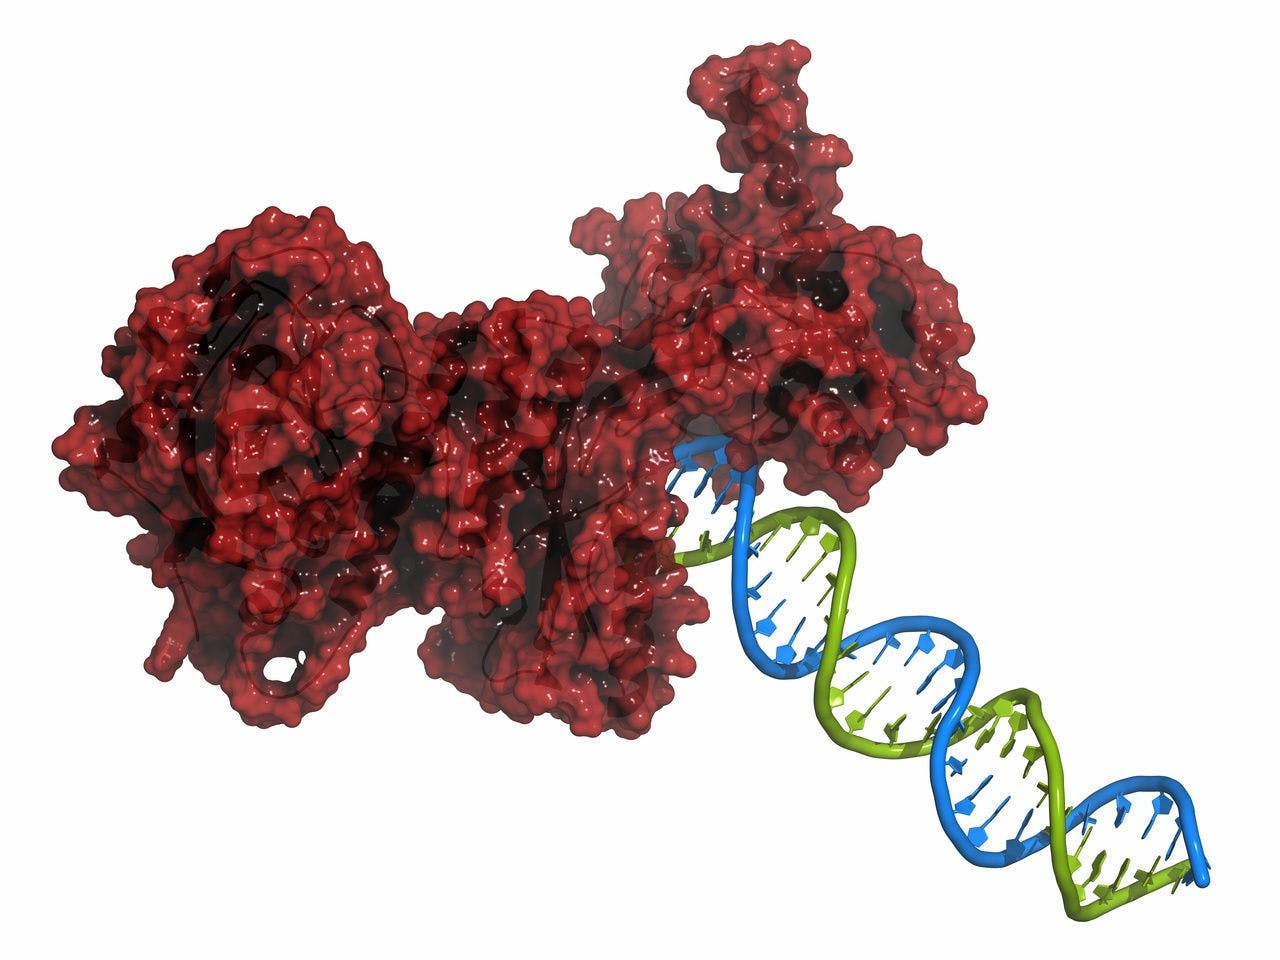 DNA repairing a protein